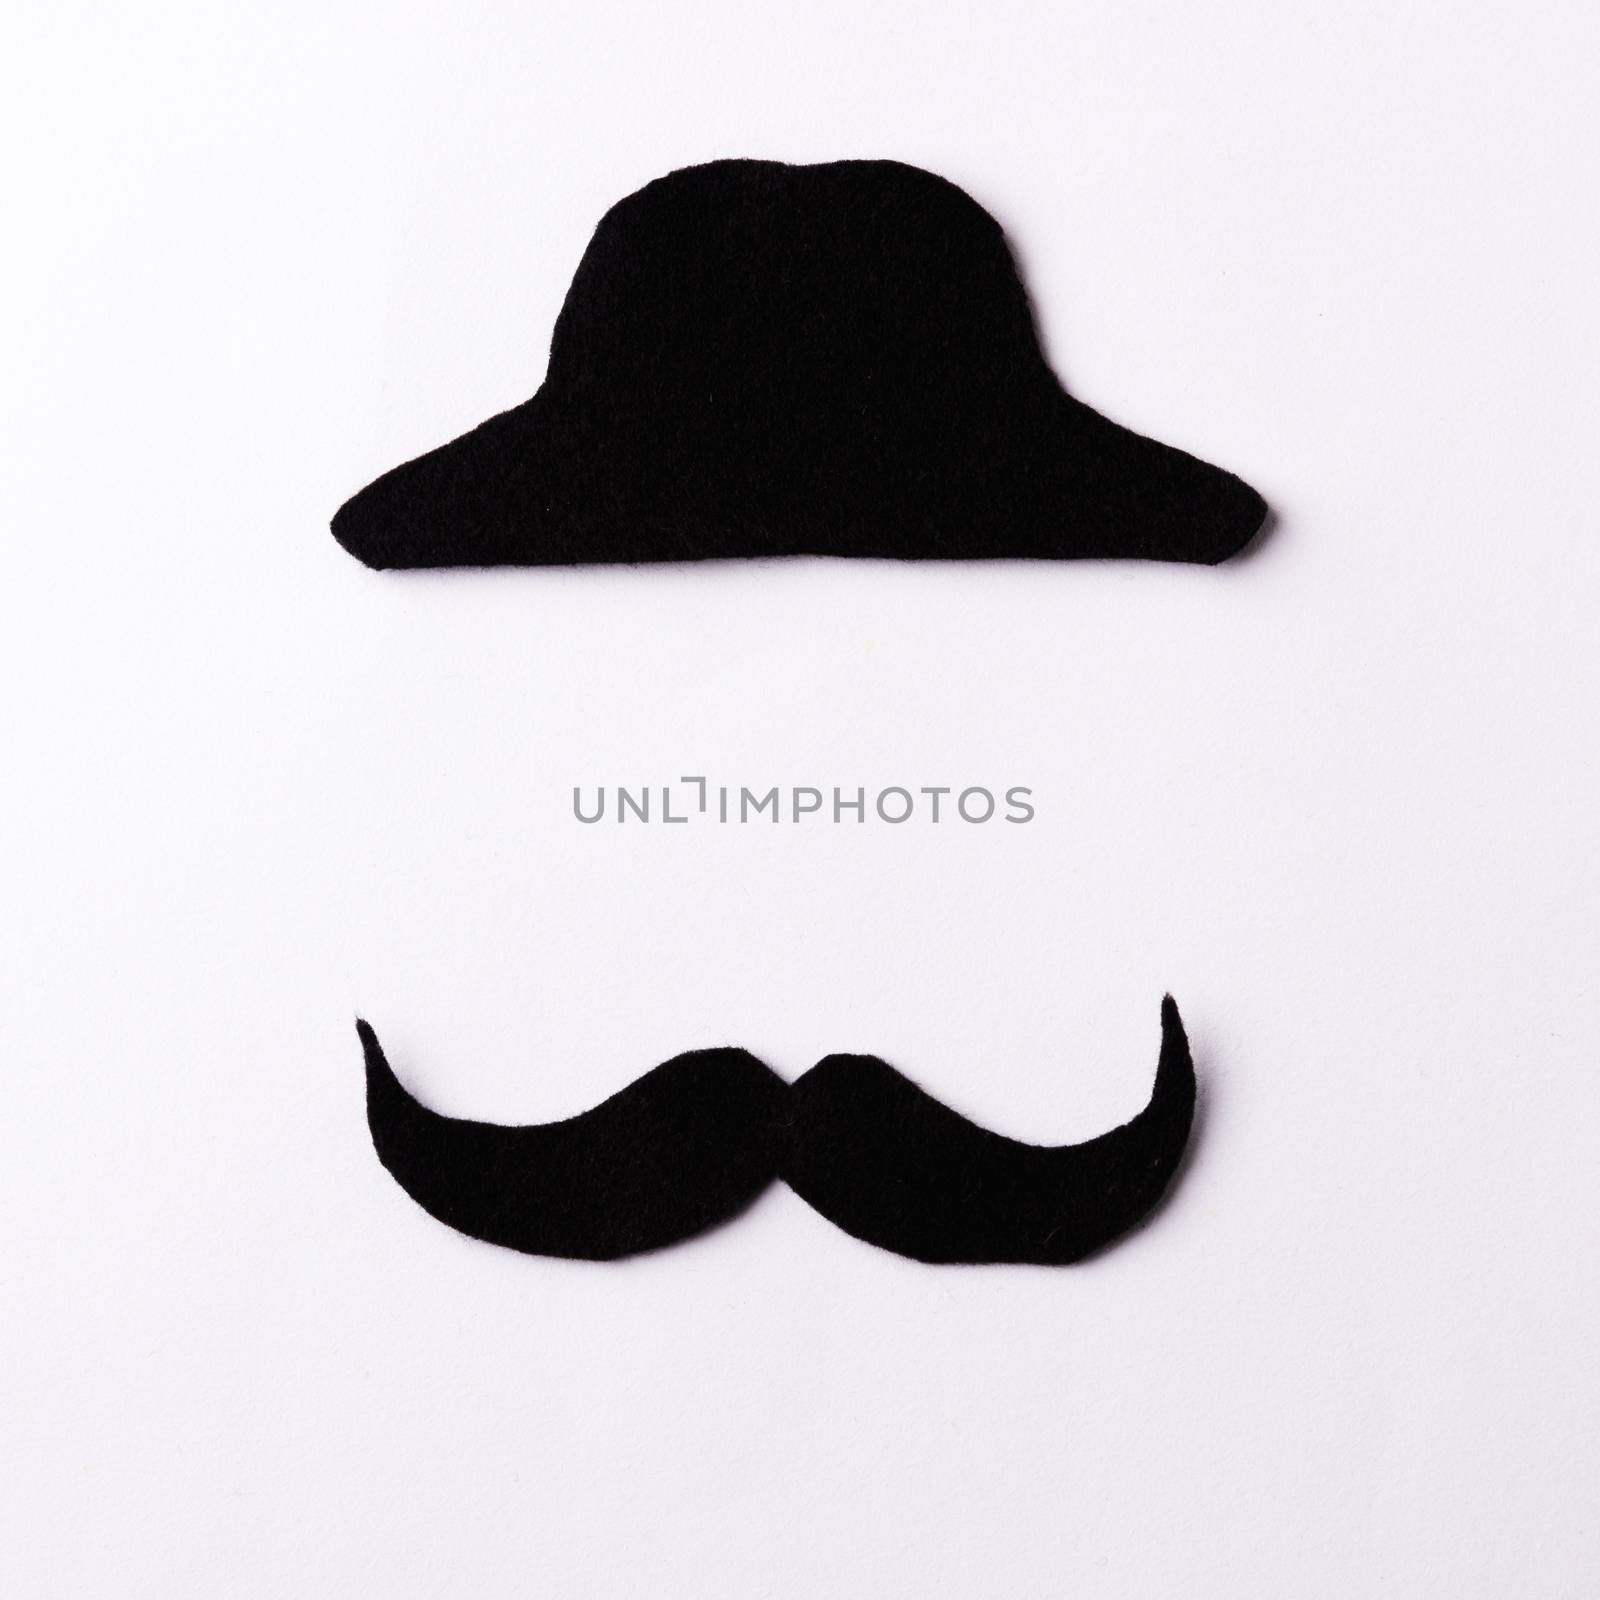 Black mustache, studio shot isolated on white background, Prostate cancer awareness month, Fathers day, minimal November moustache concept